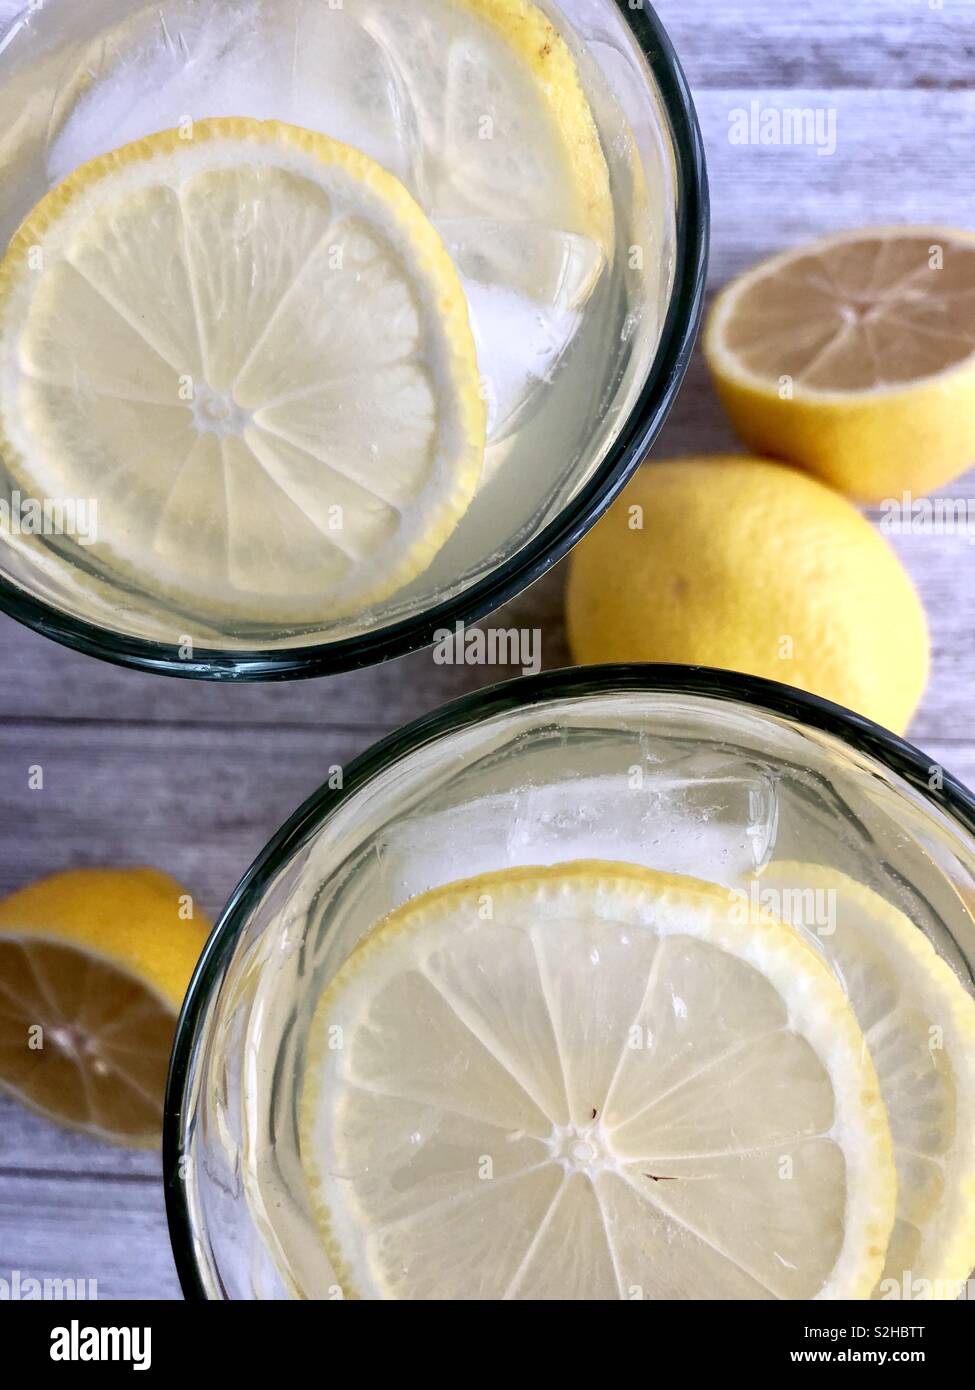 Top view of two ice cold glasses of lemonade on a wooden table Stock Photo